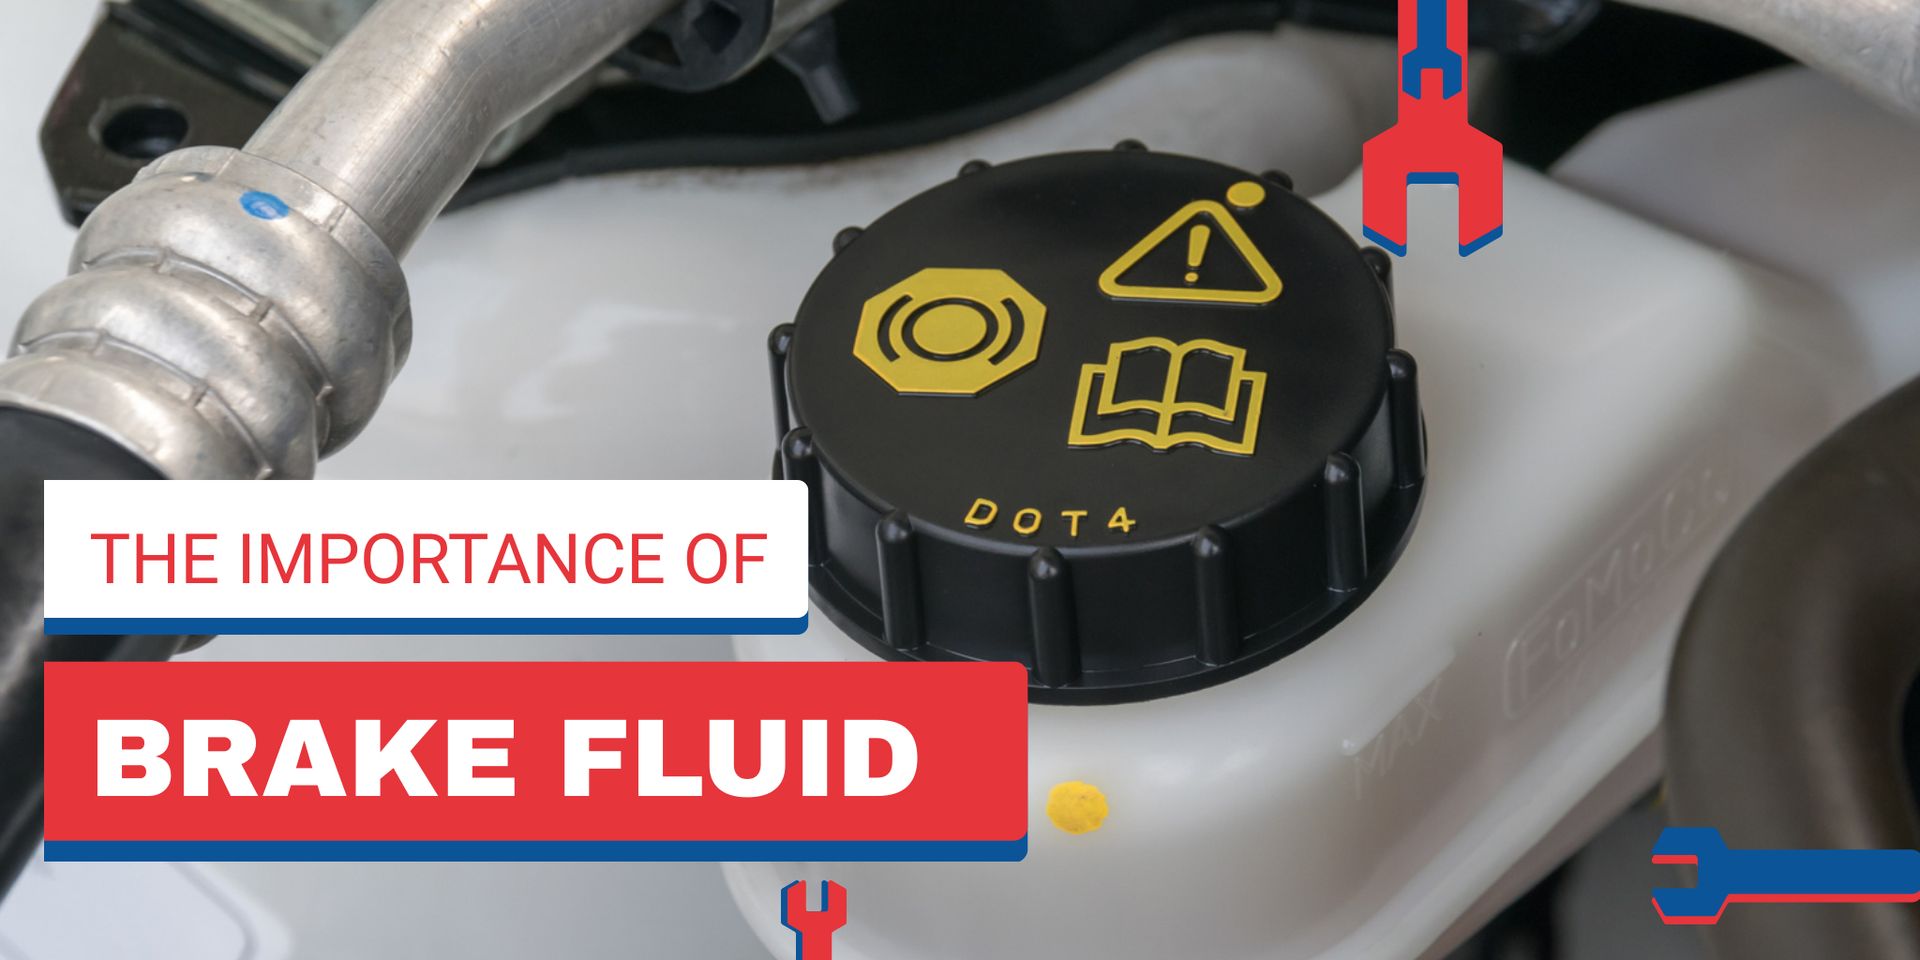 A close up of a brake fluid container on a car